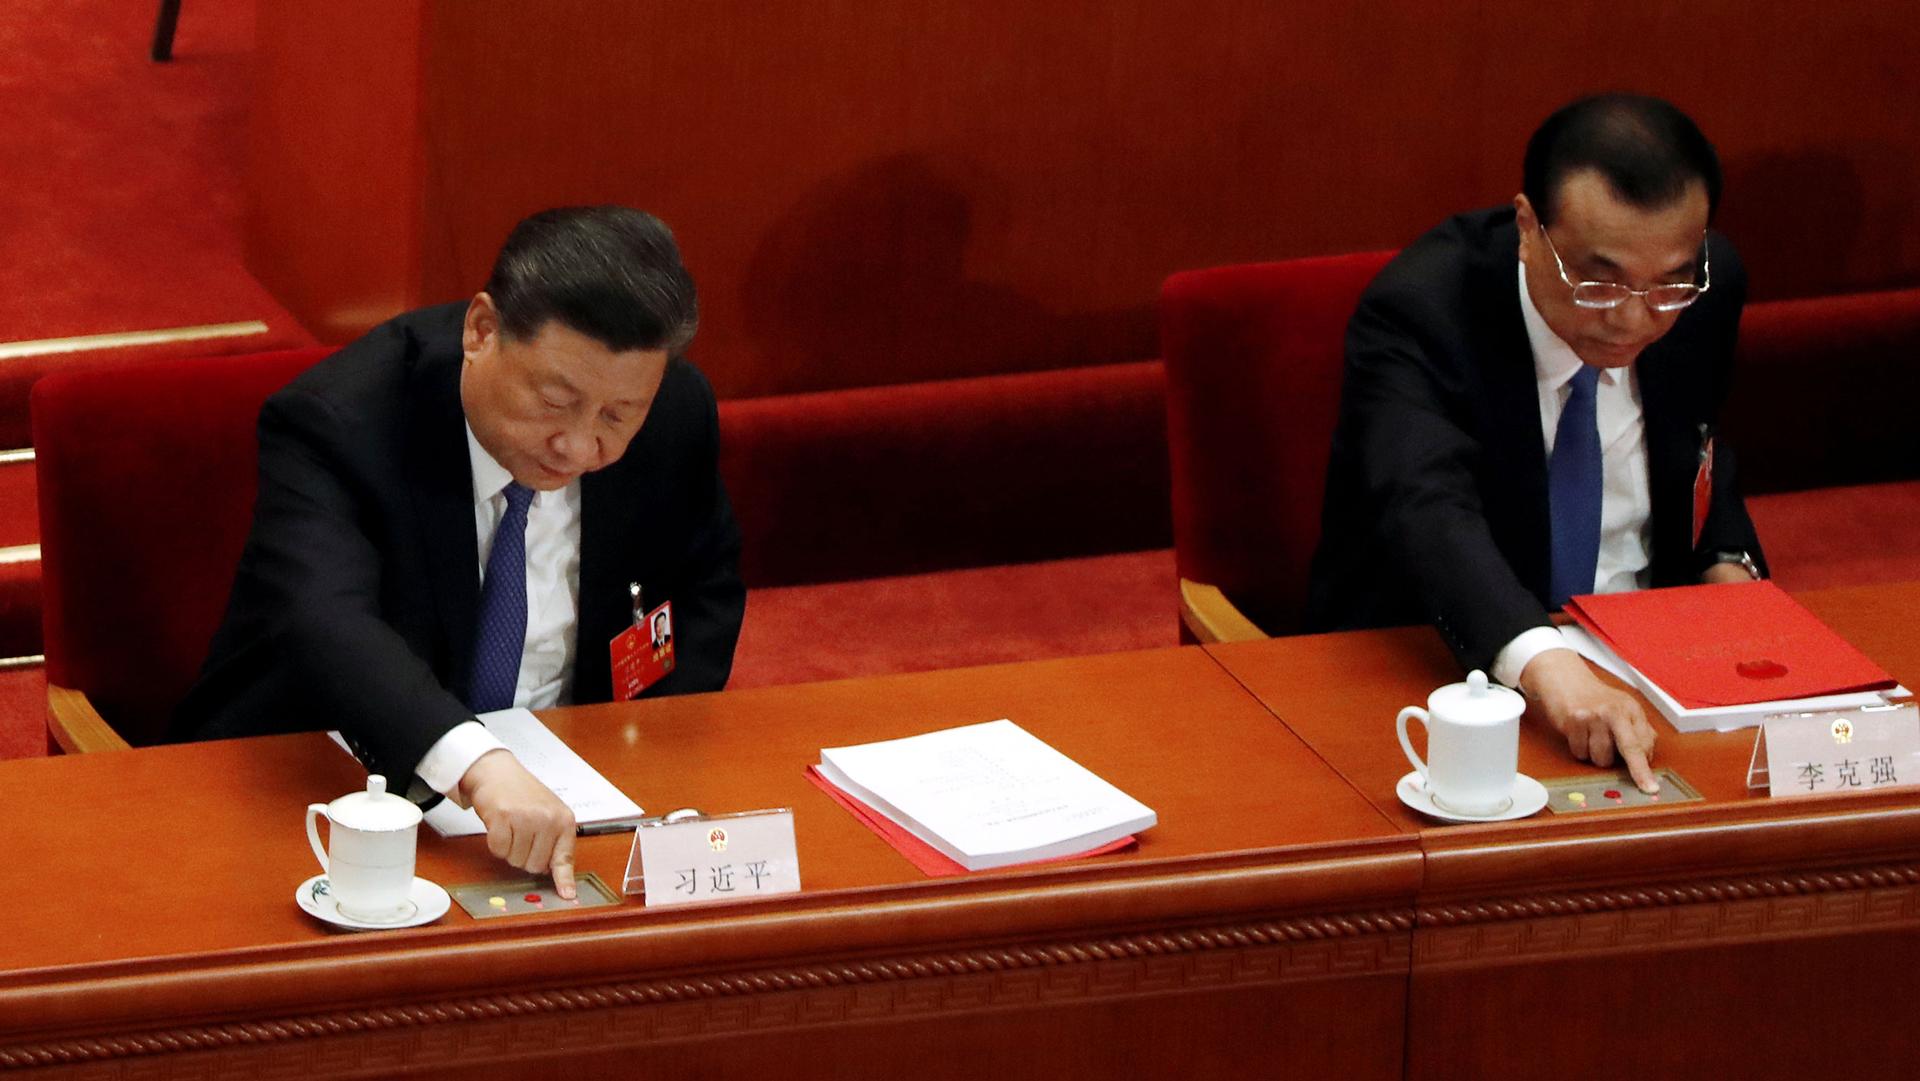 Chinese President Xi Jinping and Premier Li Keqiang are shown sitting in red chairs and pressing buttons in front of them to cast their vote.